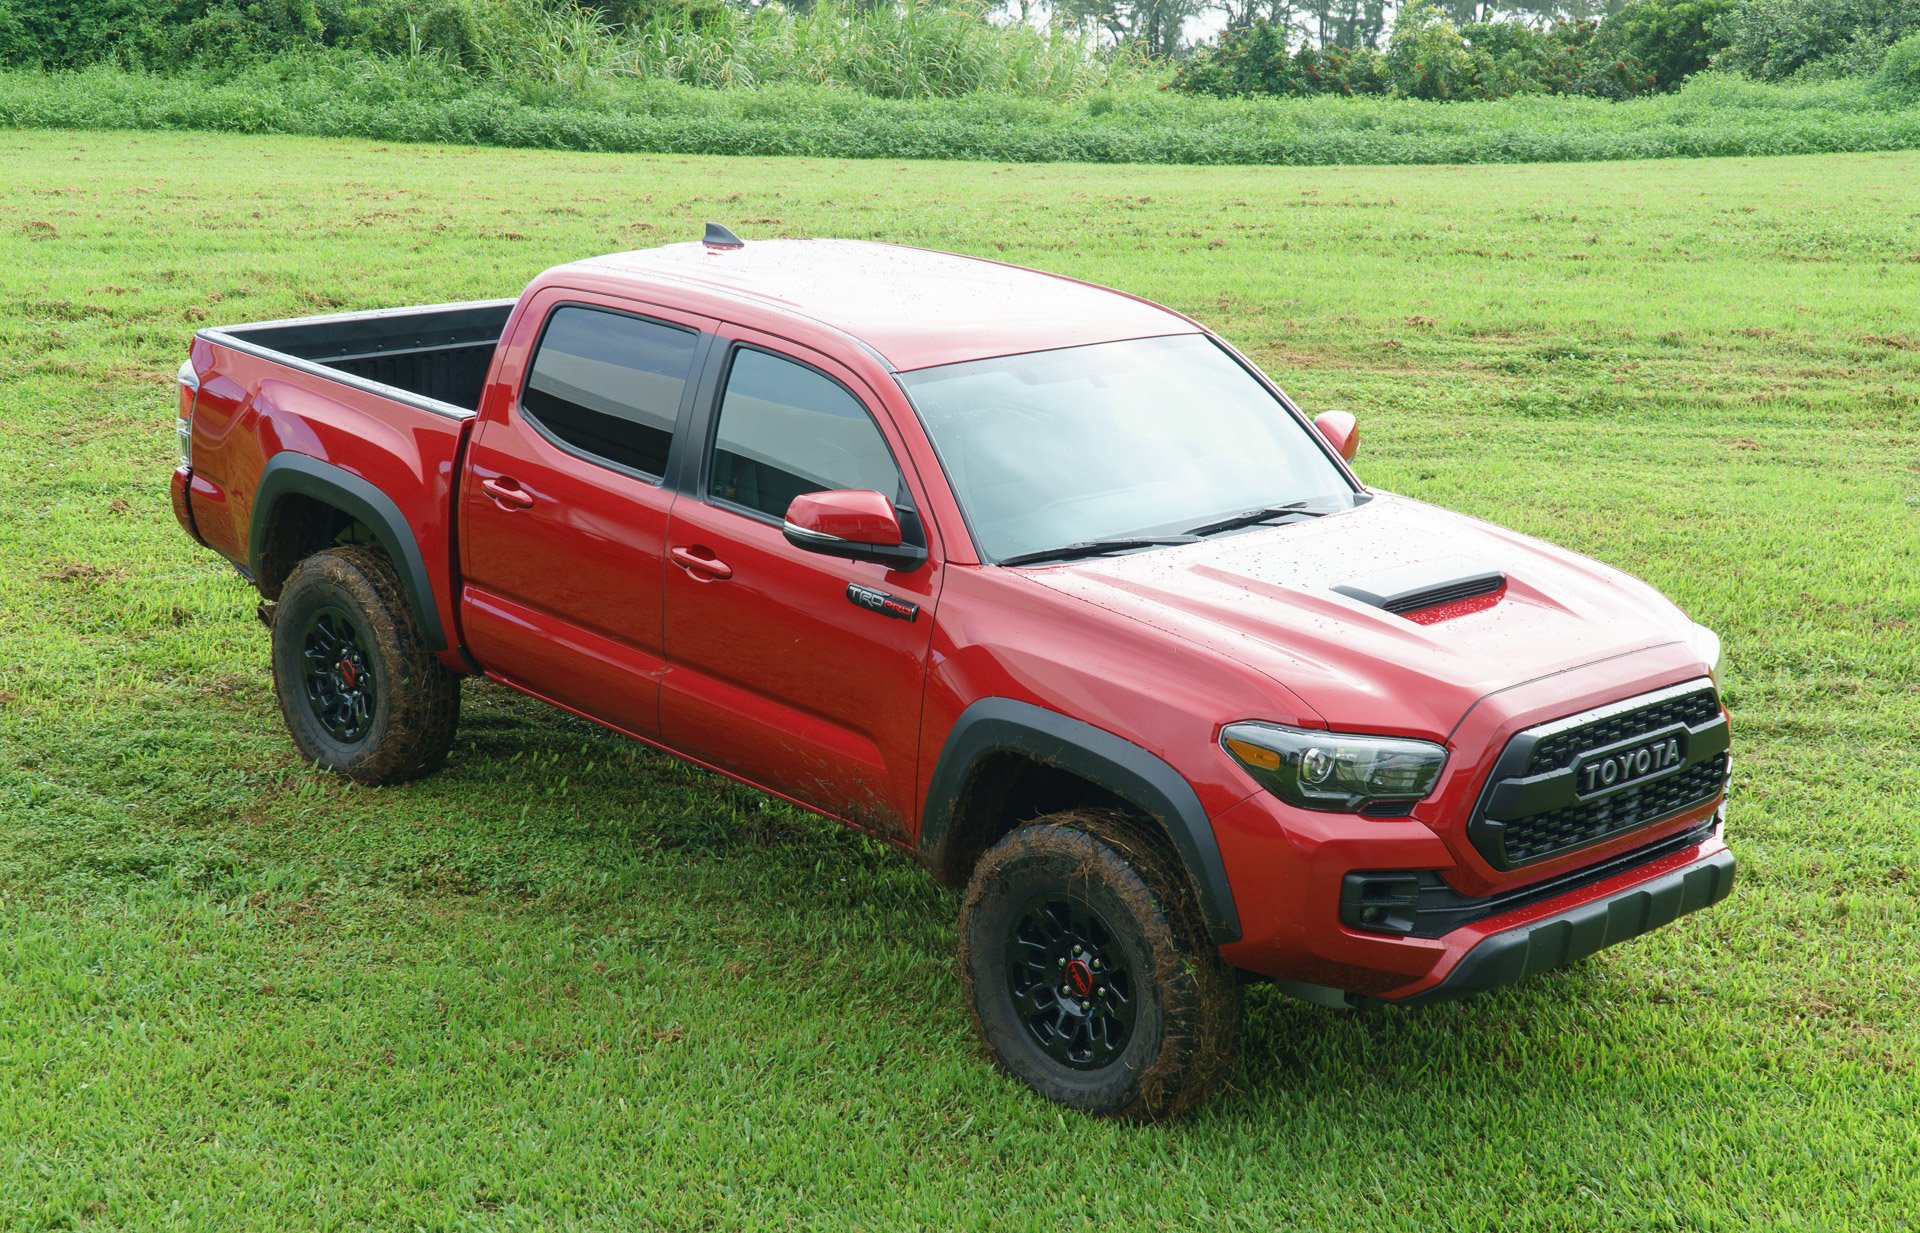 Off-Road in Hawaii with the 2017 Toyota Tacoma TRD Pro - 95 Octane